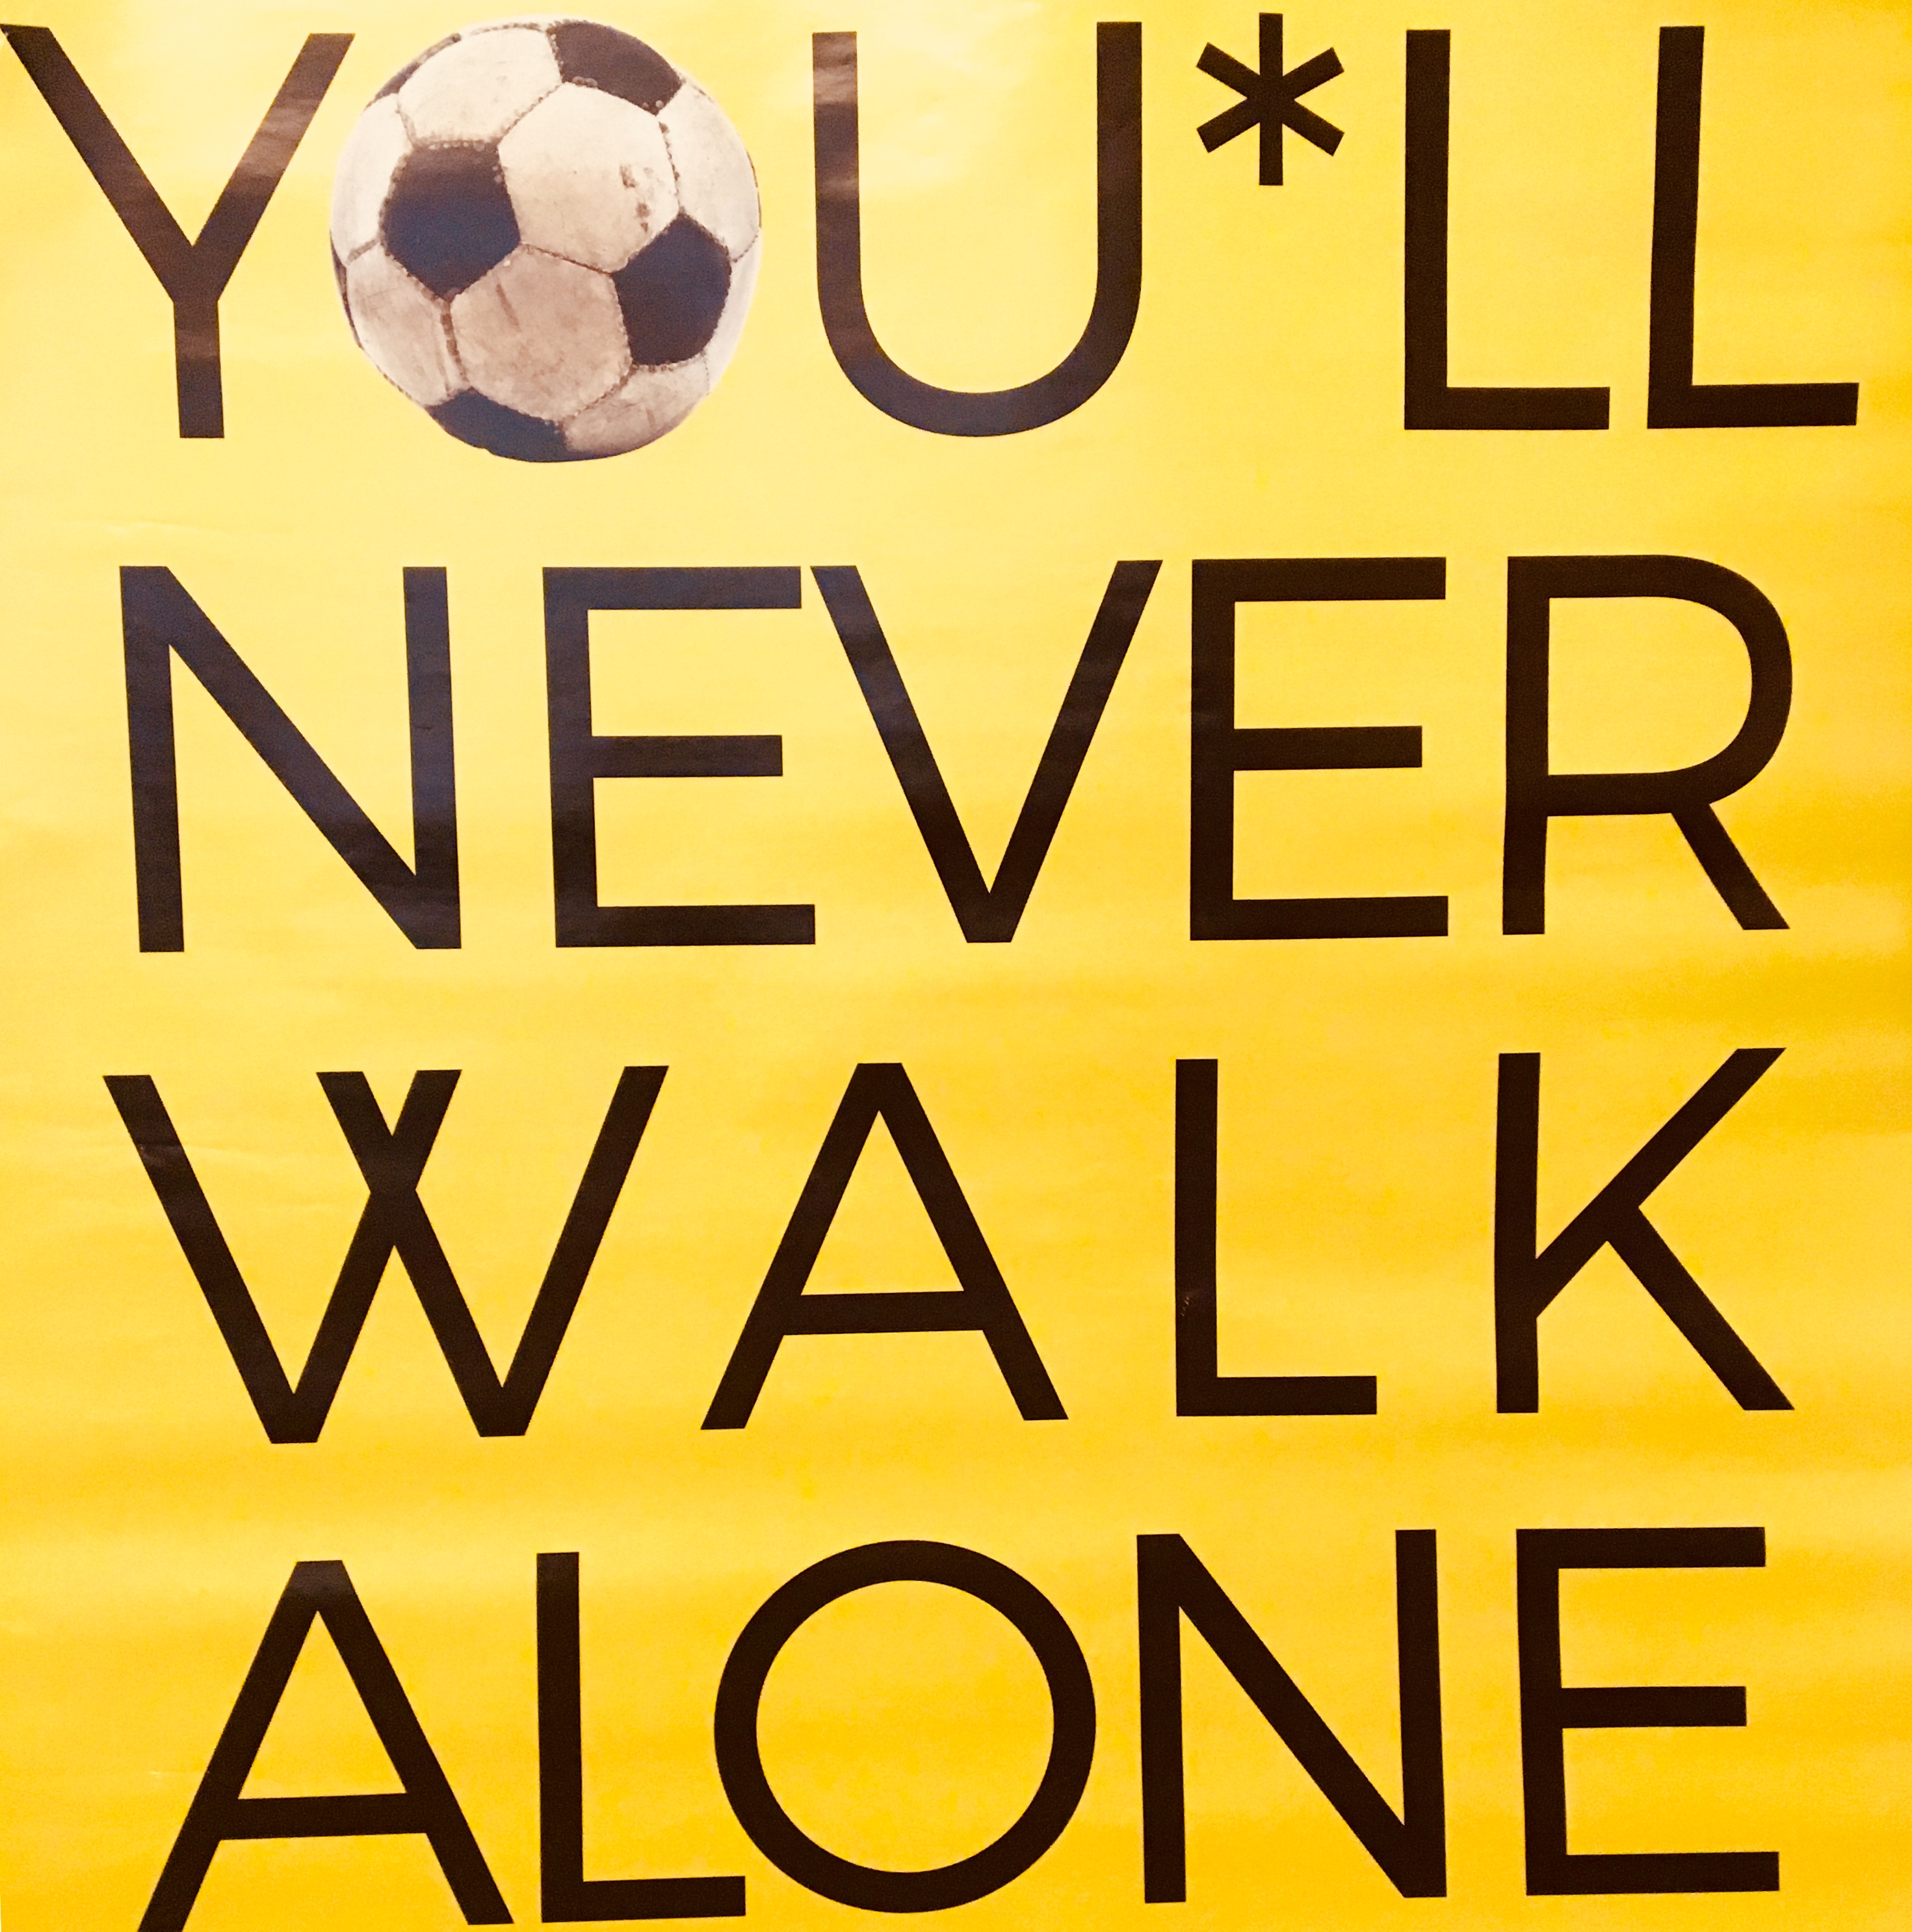 You'll Never Walk Aloneの歴史と名シーン〜世界のサッカー